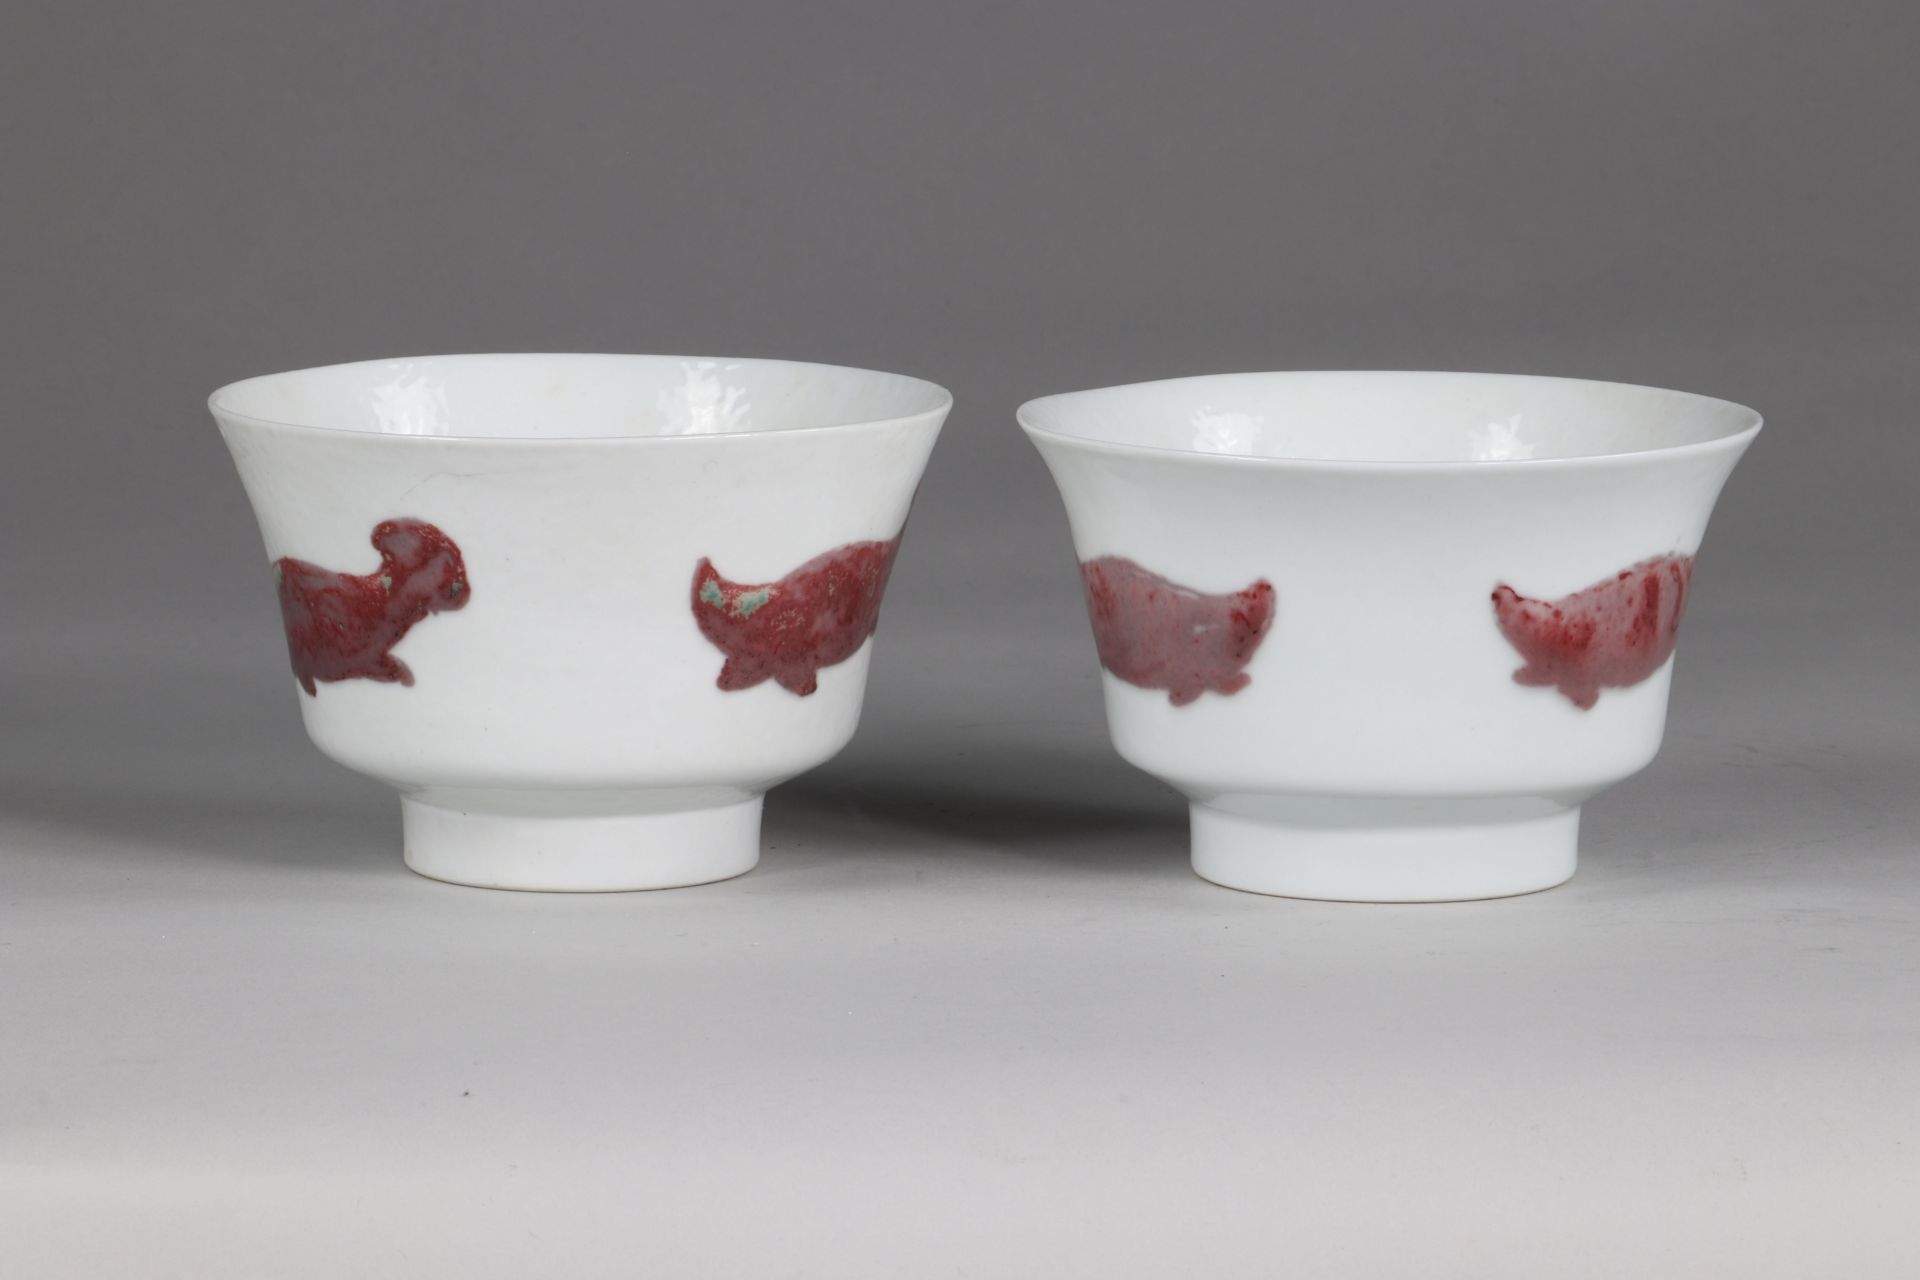 China pair of Xuande bowls, decorated with 3 fish, in copper red, inlaid in the mass the marks in co - Image 4 of 6